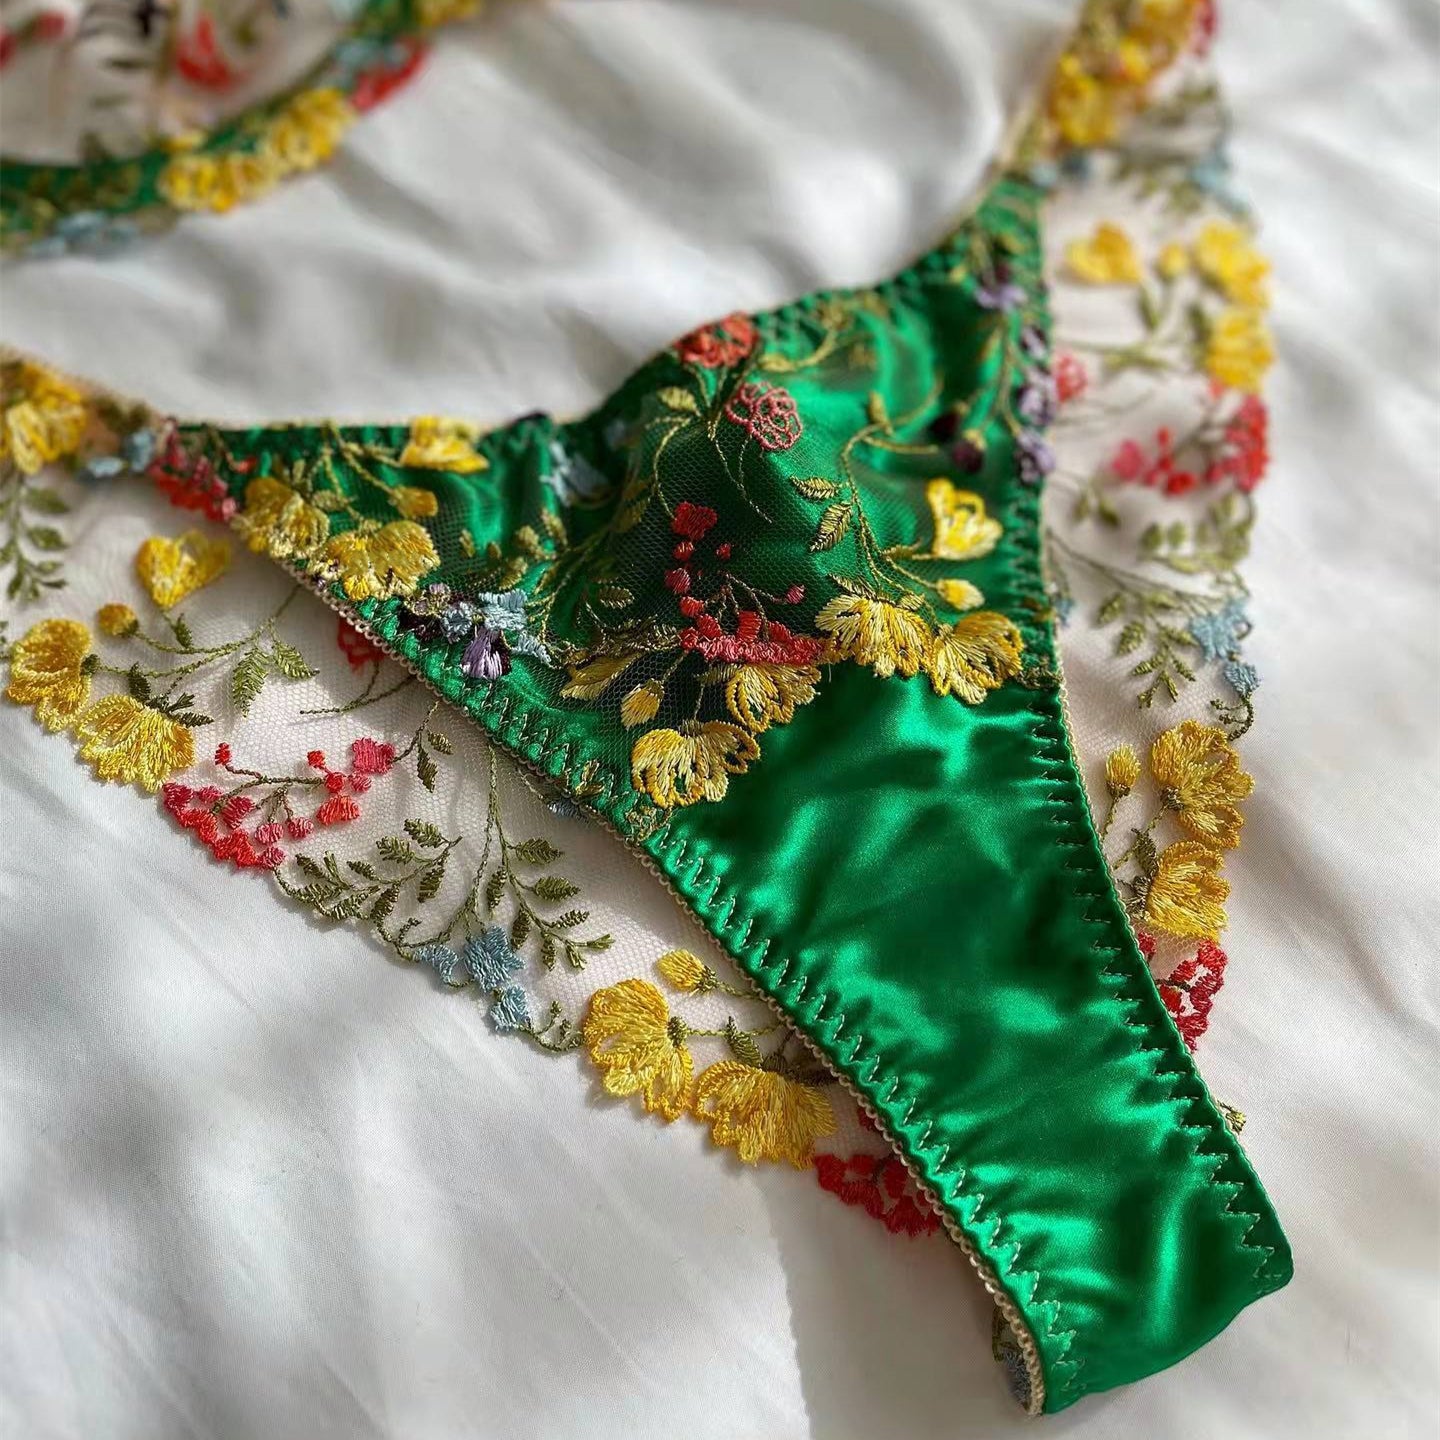 2023 Summer beautiful idyllic small floral color matching belt steel ring bra briefs sexy sexy suit